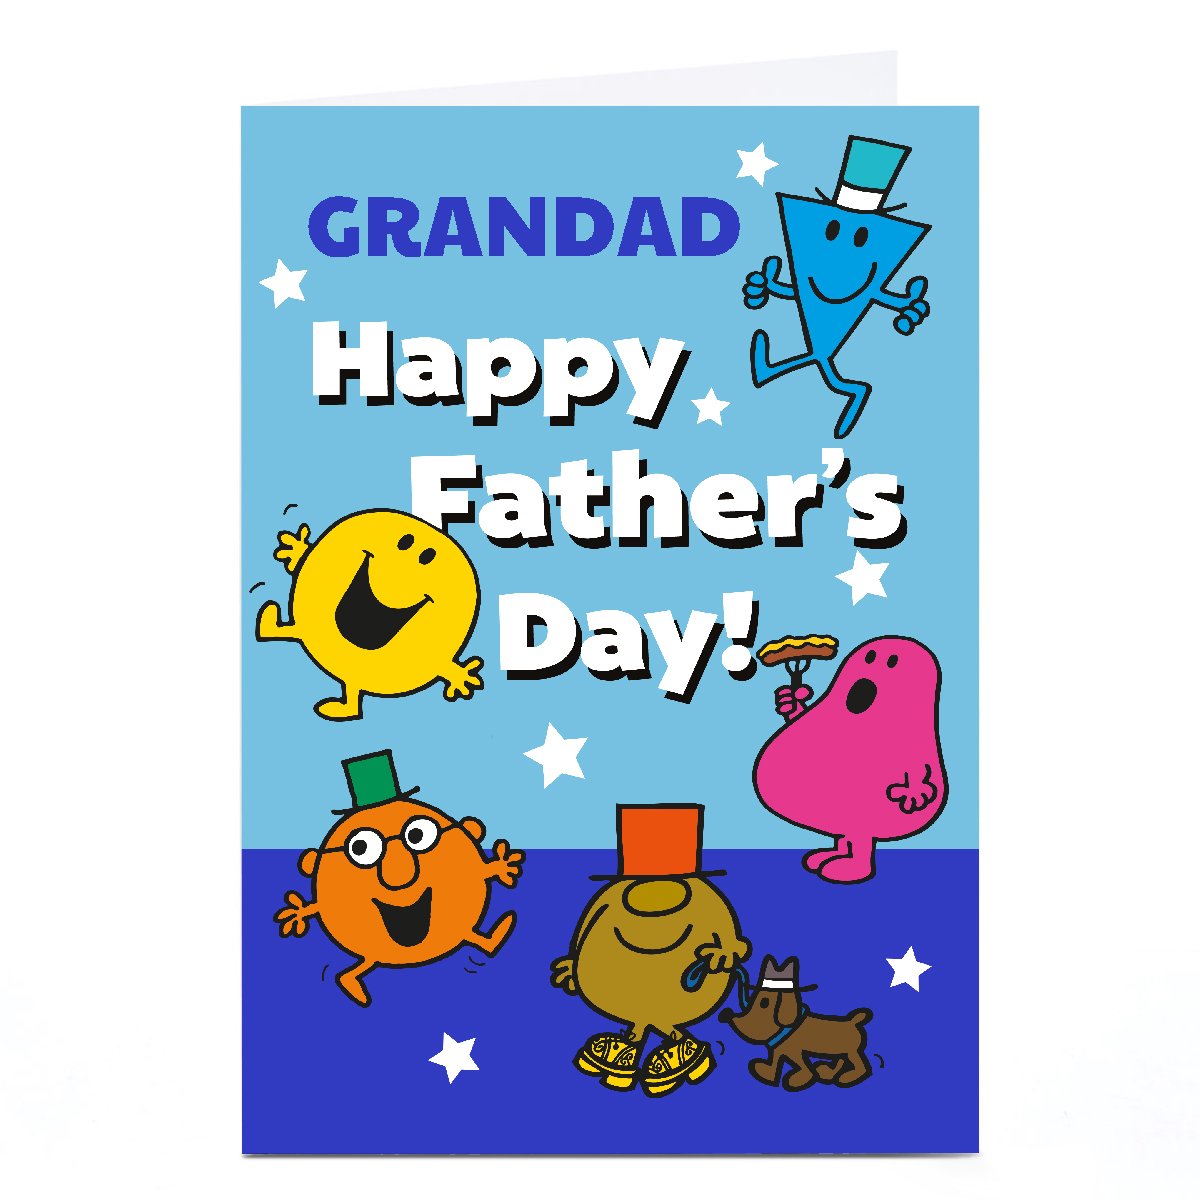 Personalised Mr Men Father's Day Card - Mr Men Characters, Grandad